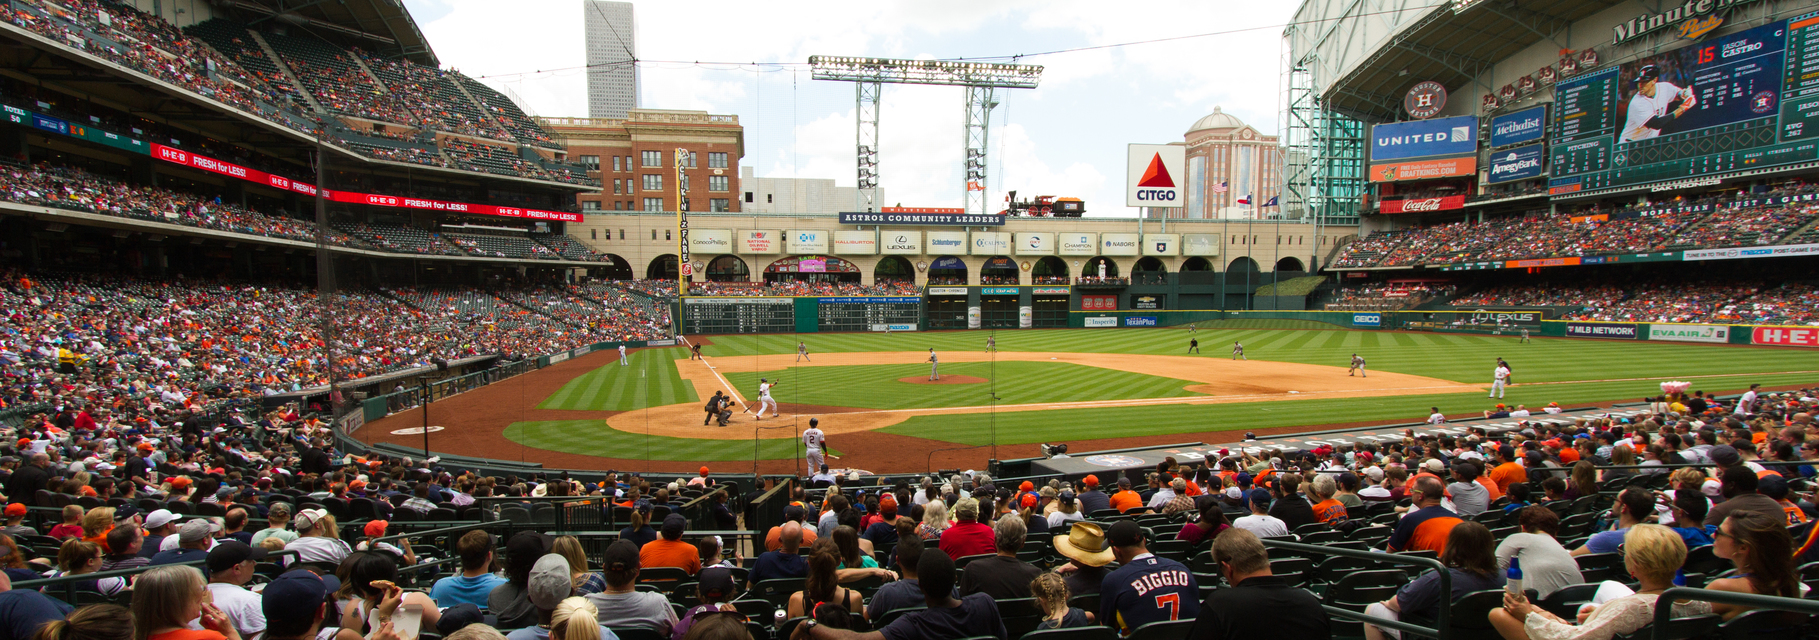 Minute Maid Park  Venues in Houston, TX